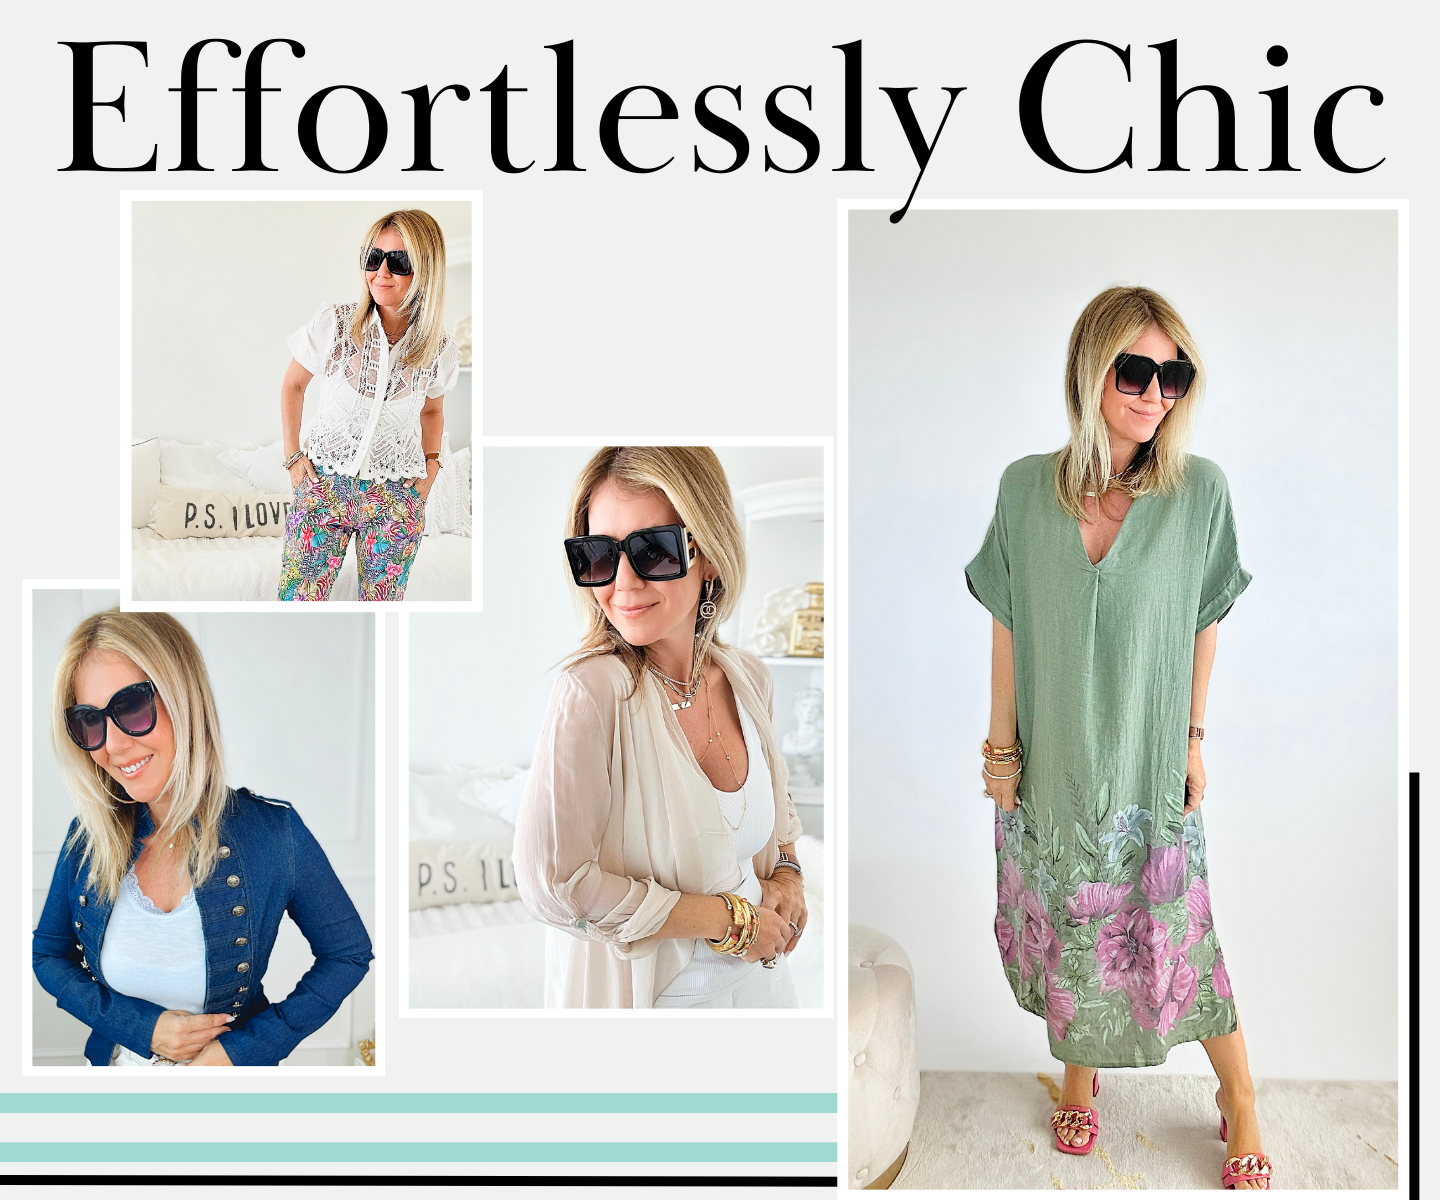 Effortlessly Chic Italian Apparel | Coastal Bloom Boutique | Women's Fashion, Home, and Accessories Located in Indialantic, FL